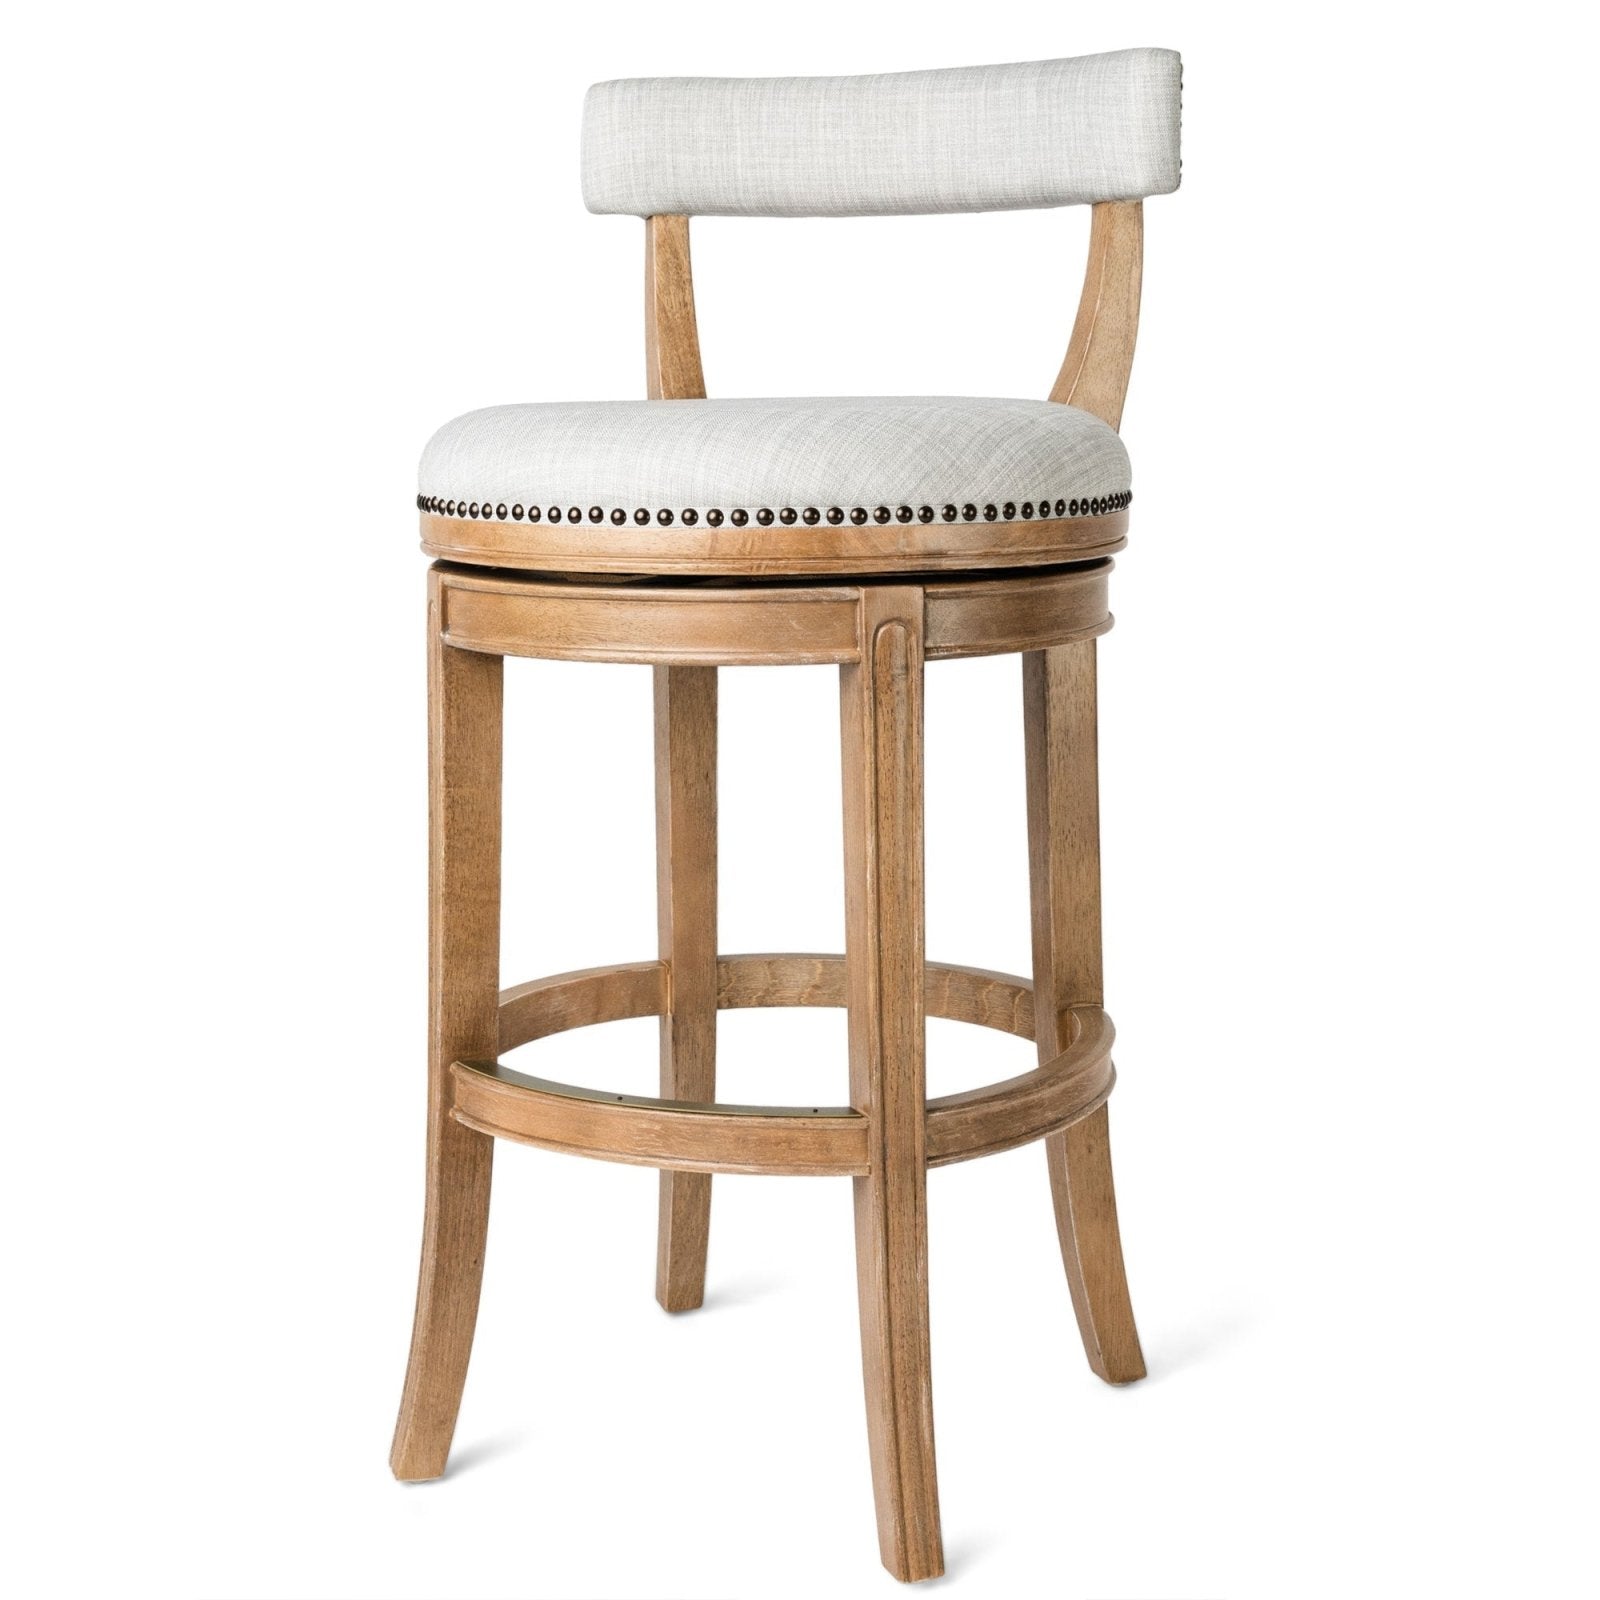 Alexander Bar Stool in Weathered Oak Finish with Sand Color Fabric Upholstery in Stools by Maven Lane